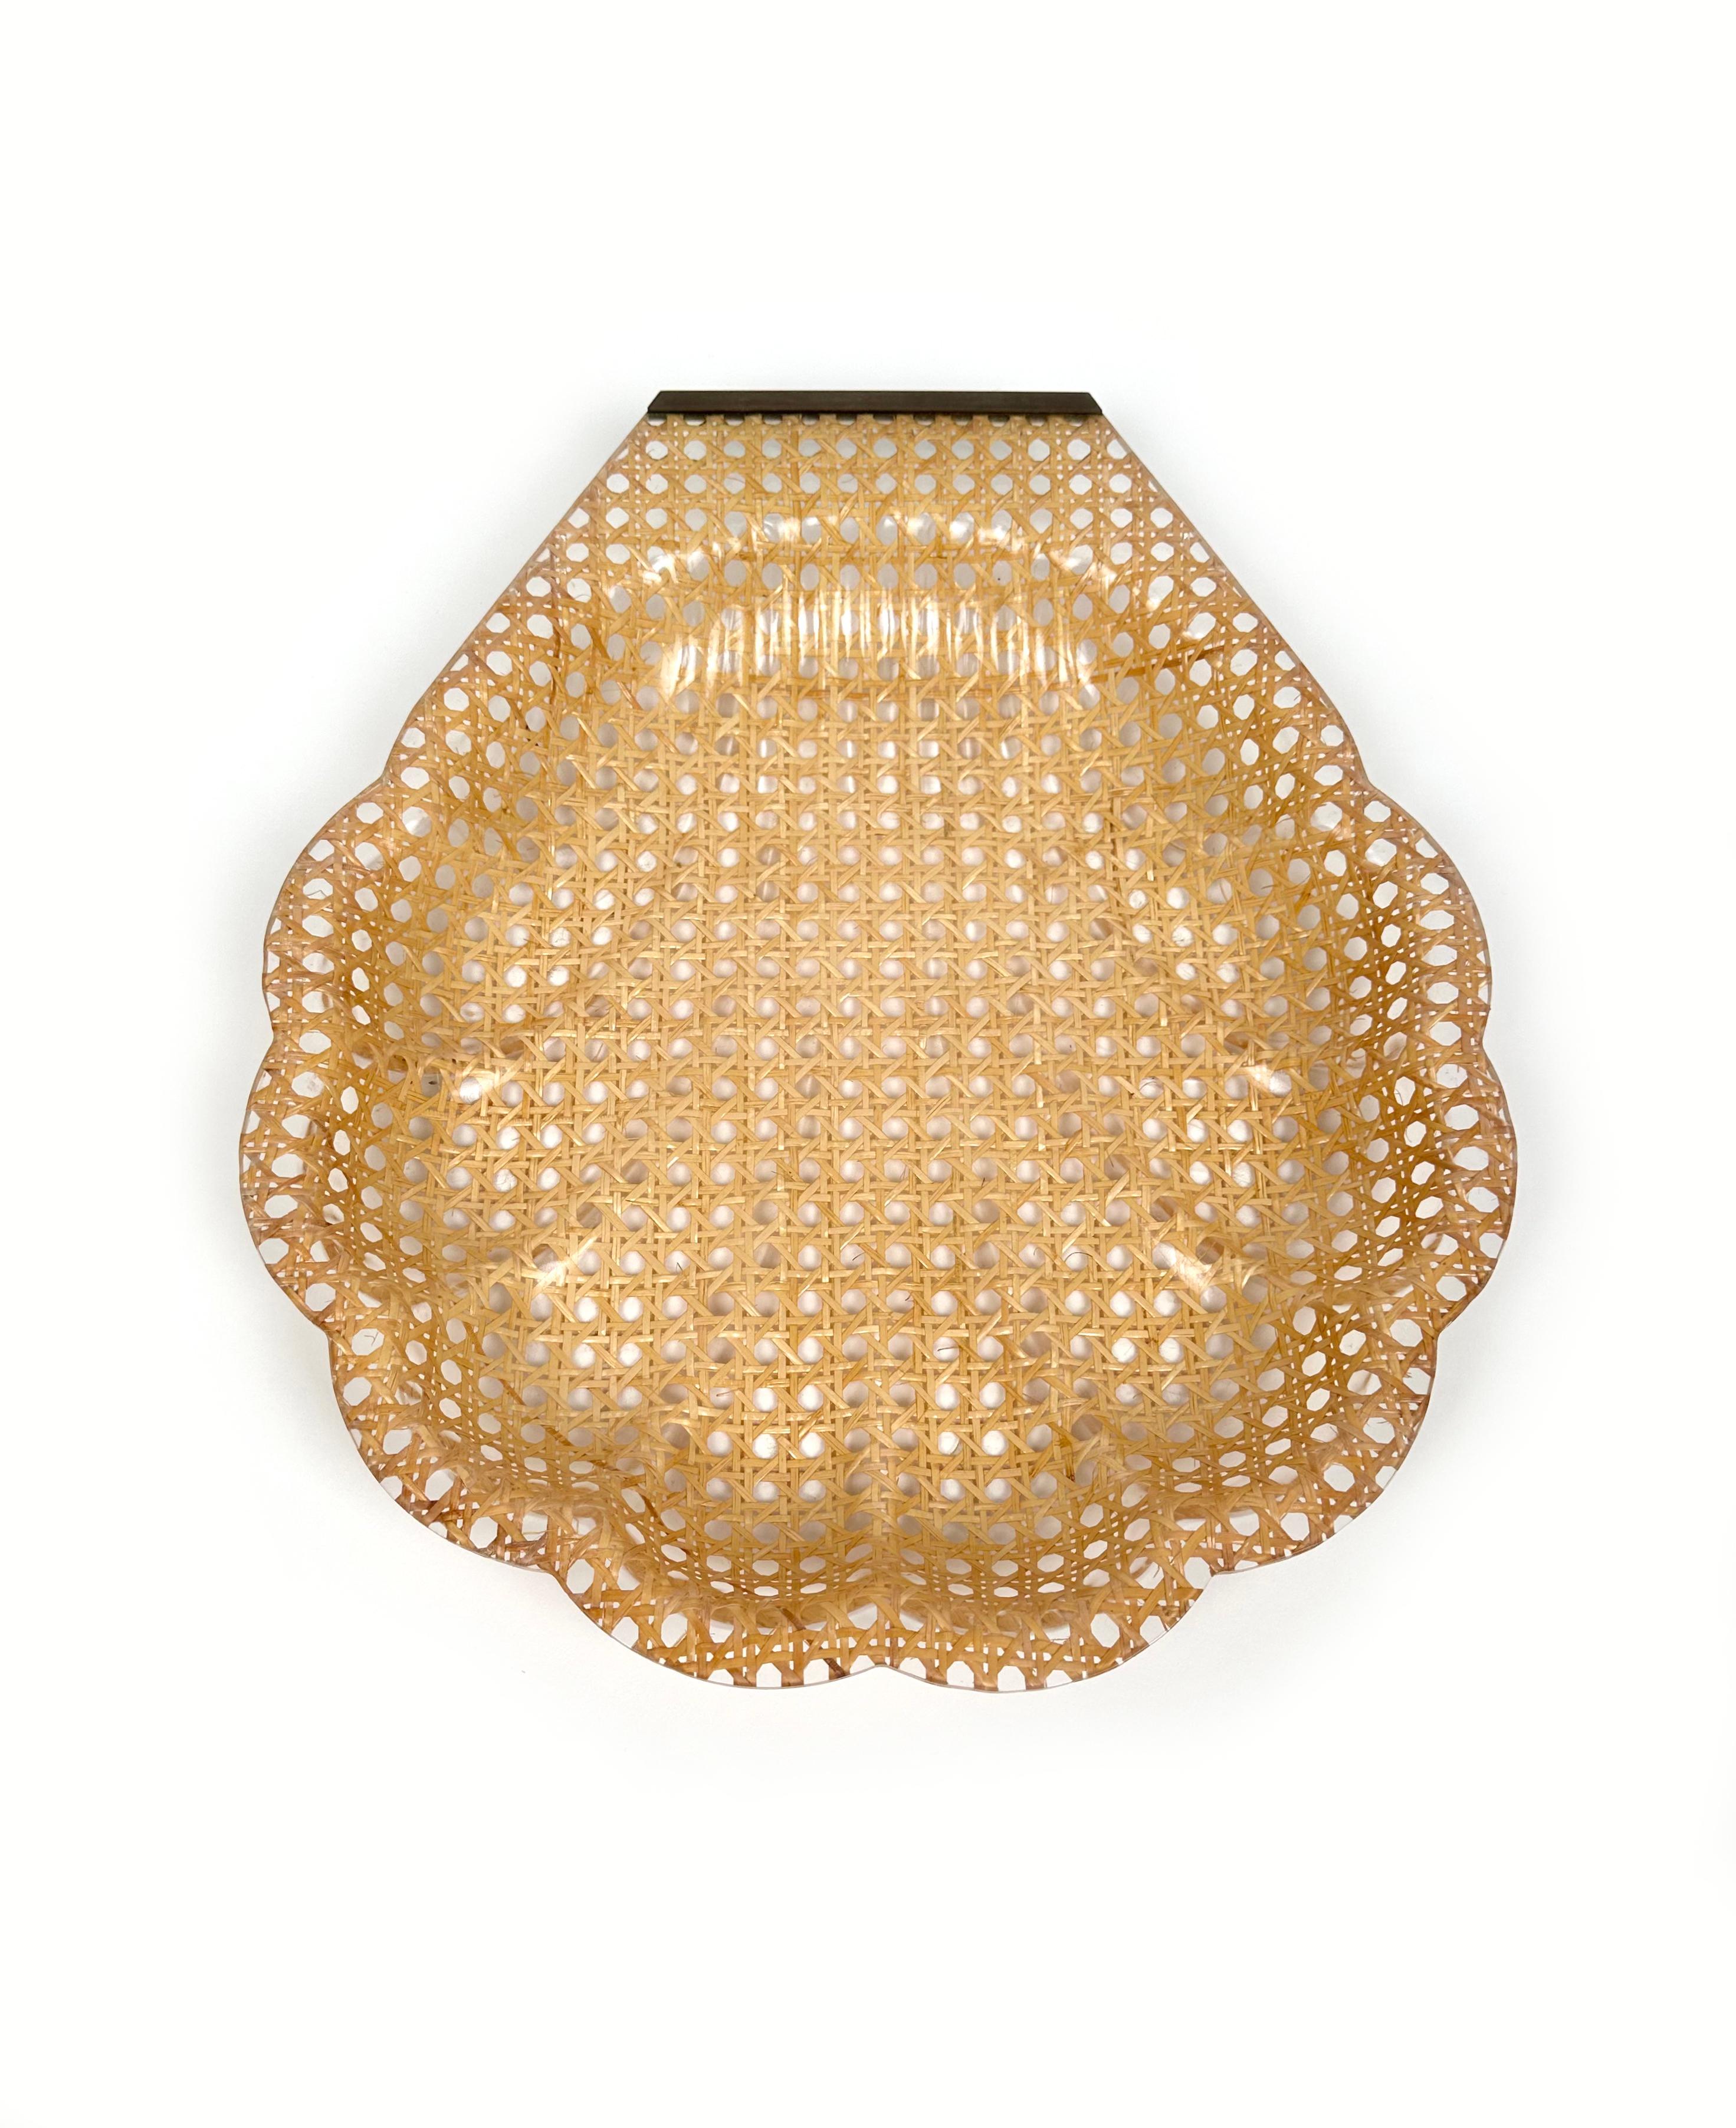 Mid-Century Modern Shell Serving Tray Lucite and Rattan Christian Dior Style, France, 1970s